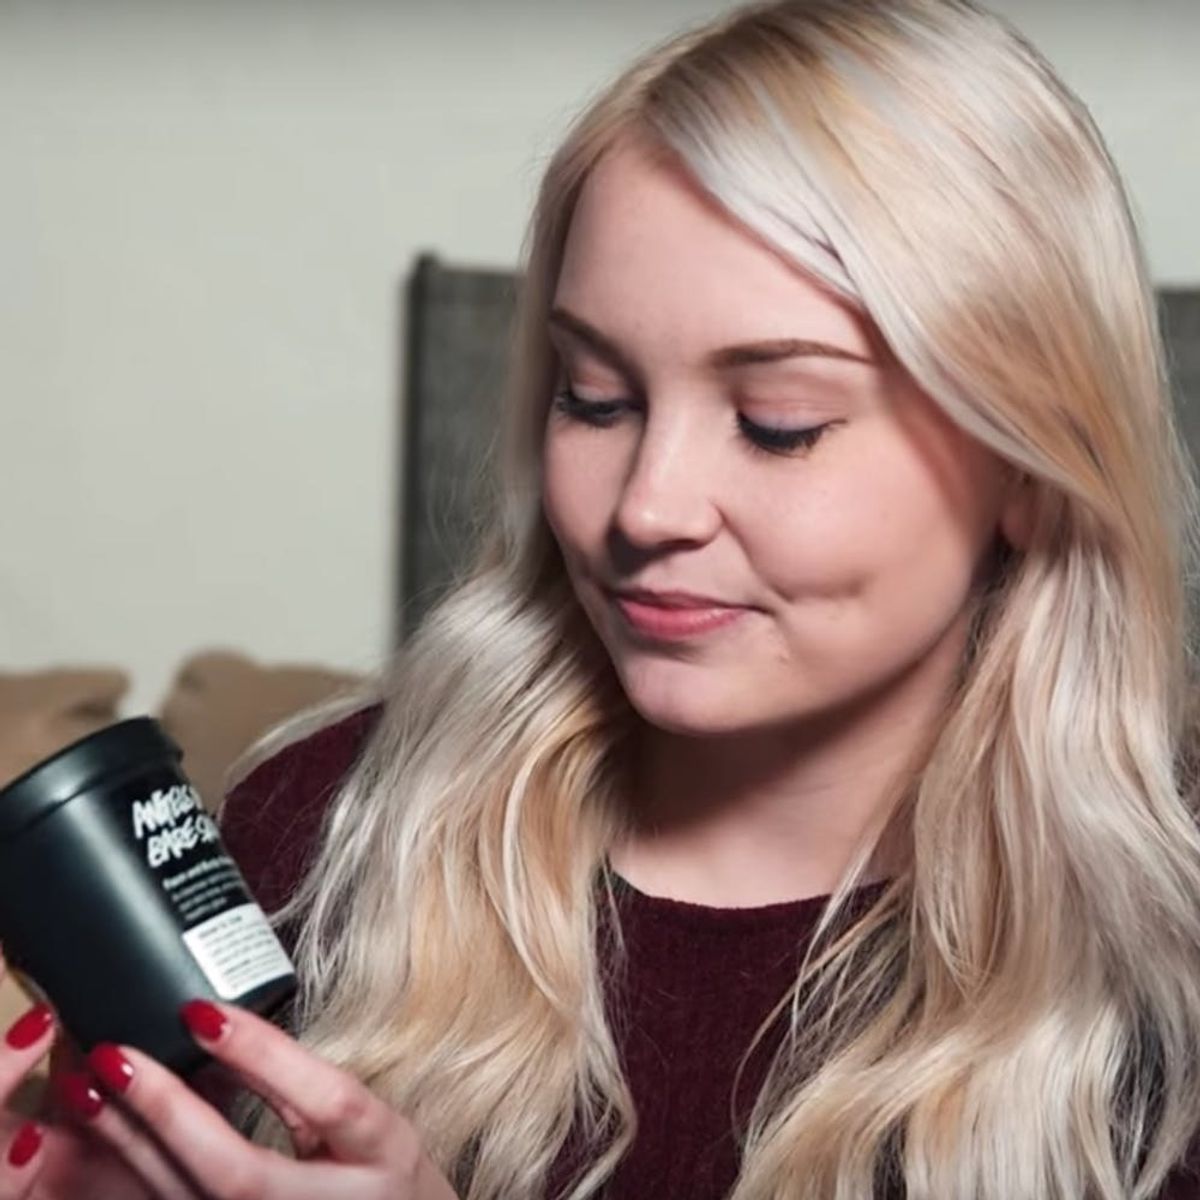 Lush Made an ASMR Video So You Can Finally Relax